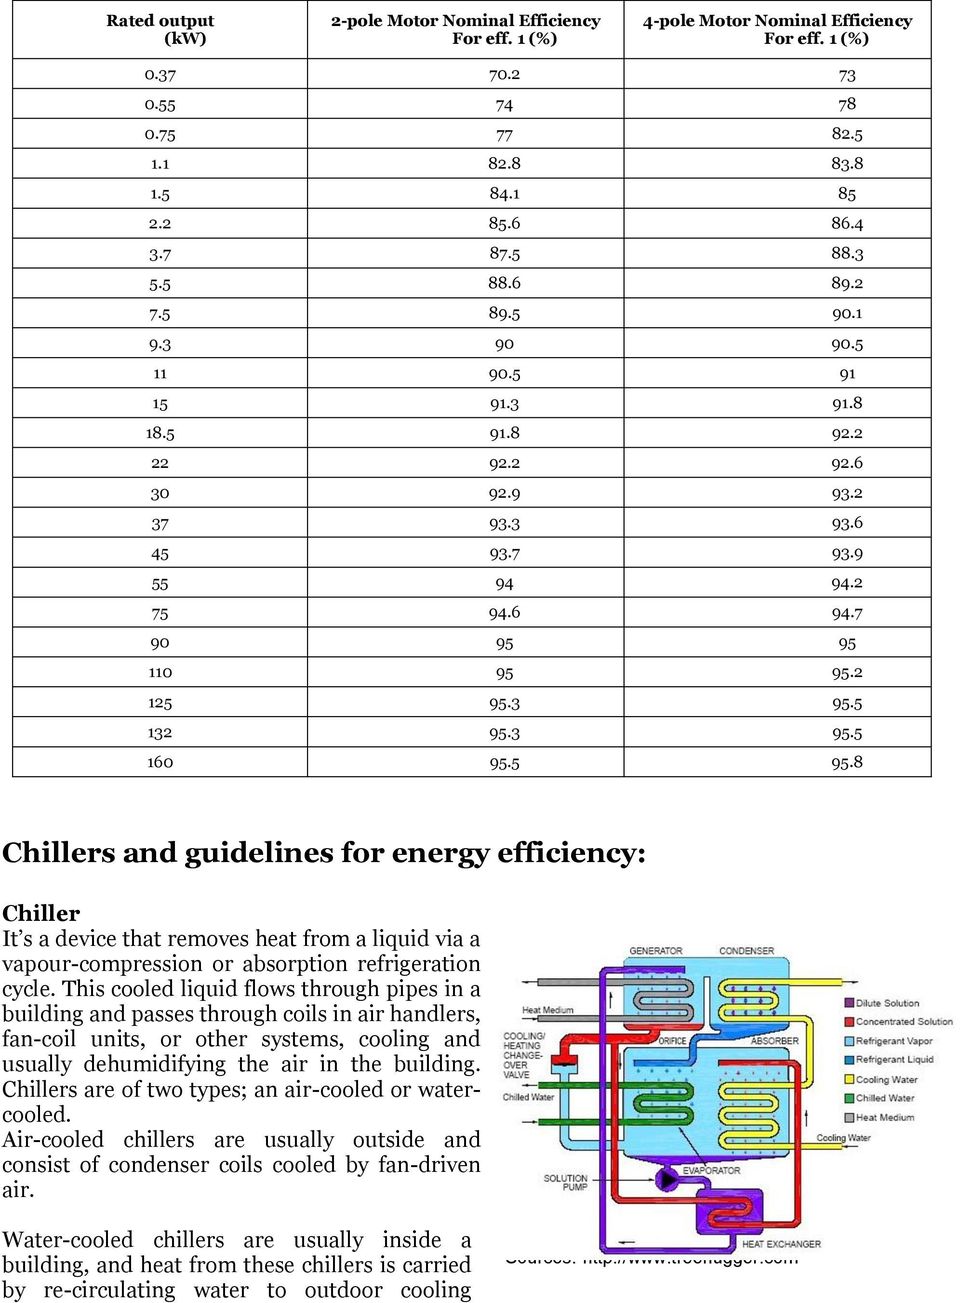 5 132 95.3 95.5 160 95.5 95.8 Chillers and guidelines for energy efficiency: Chiller It s a device that removes heat from a liquid via a vapour-compression or absorption refrigeration cycle.